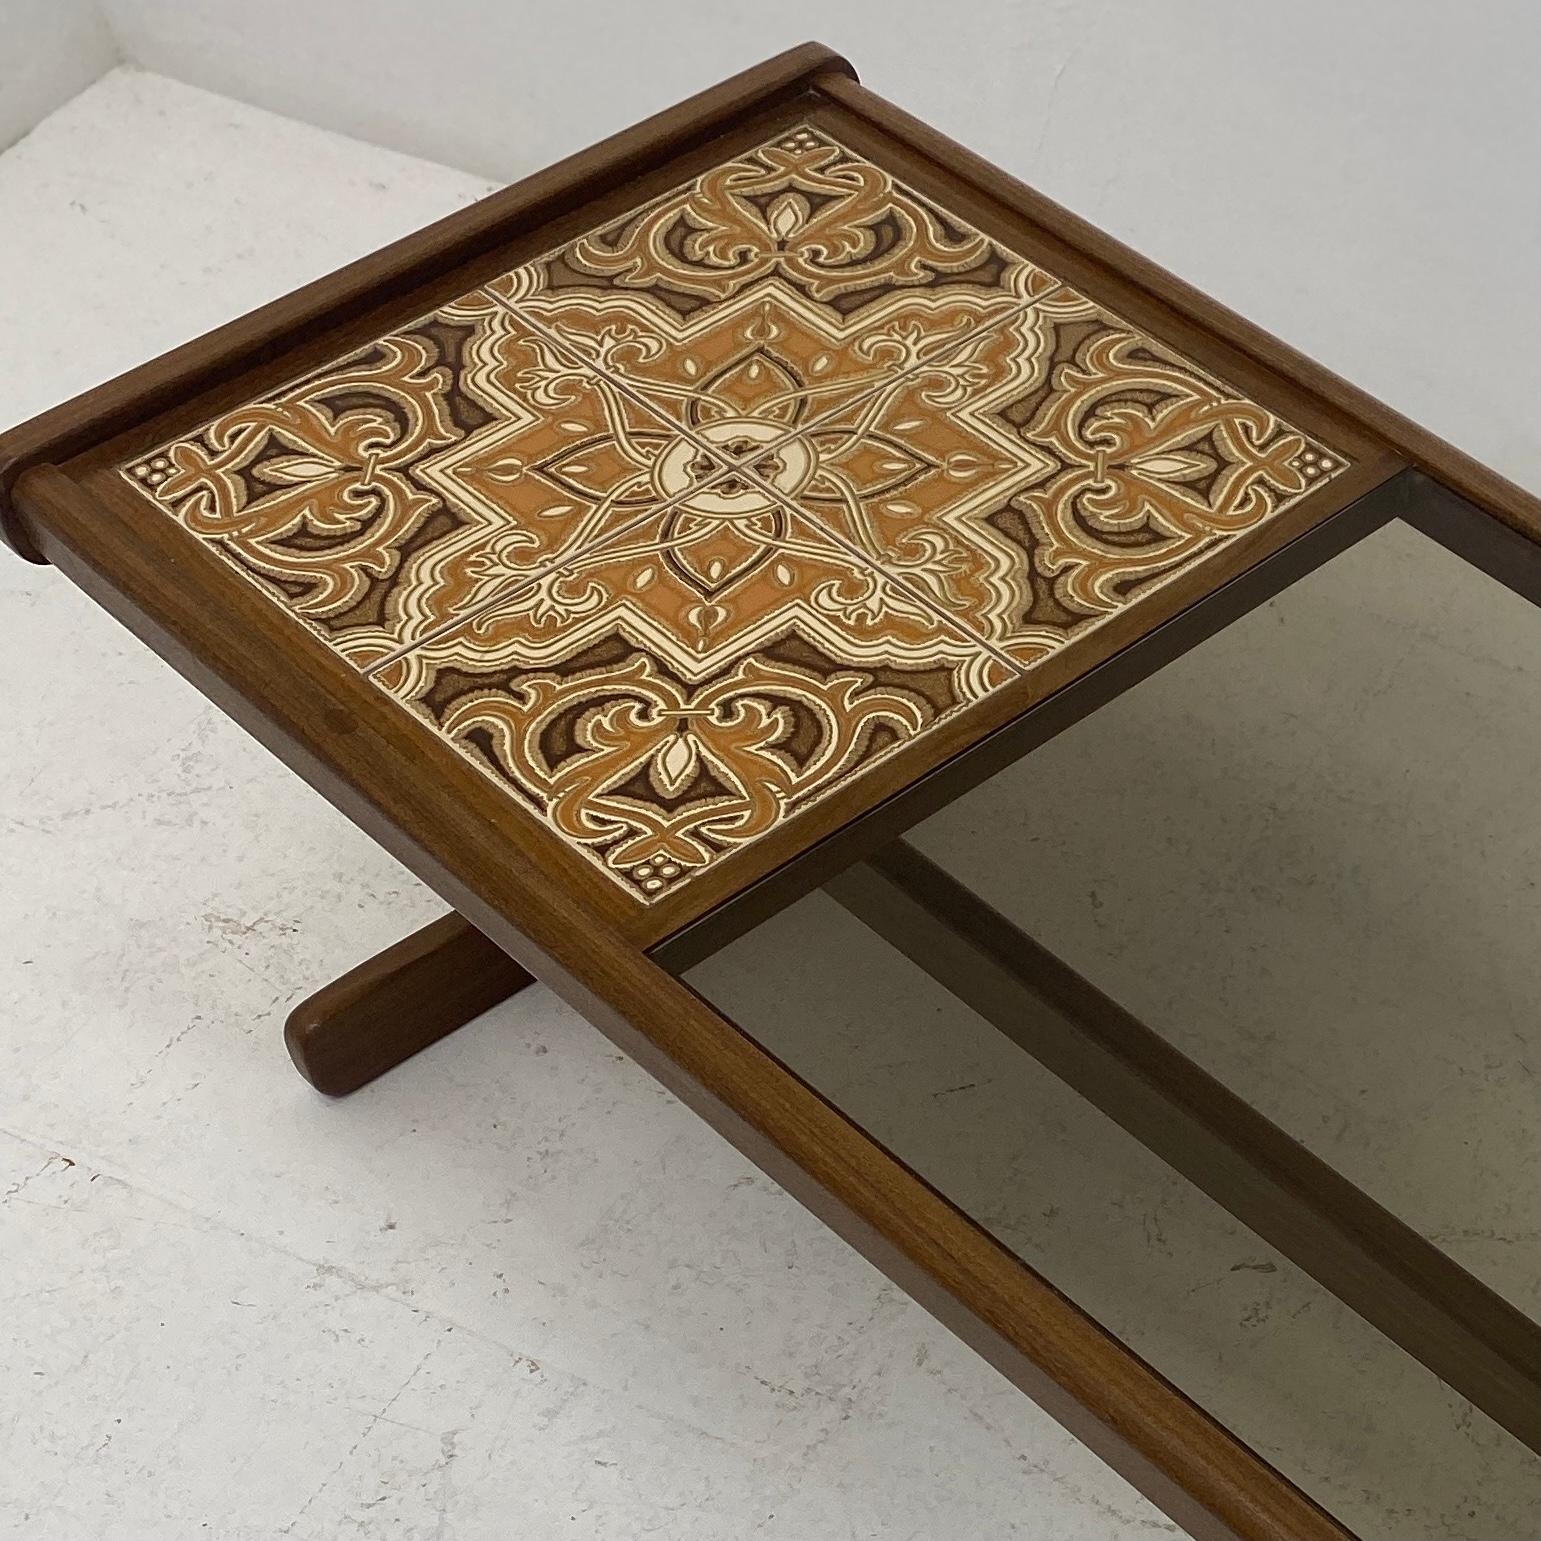 A 1960s rectangular long coffee table by G Plan designed by Victor Wilkins. The coffee table is part smoked glass and part ceramic tiled top on a solid teak frame. The tile is in a floral orange & brown pattern. The coffee table legs are a great